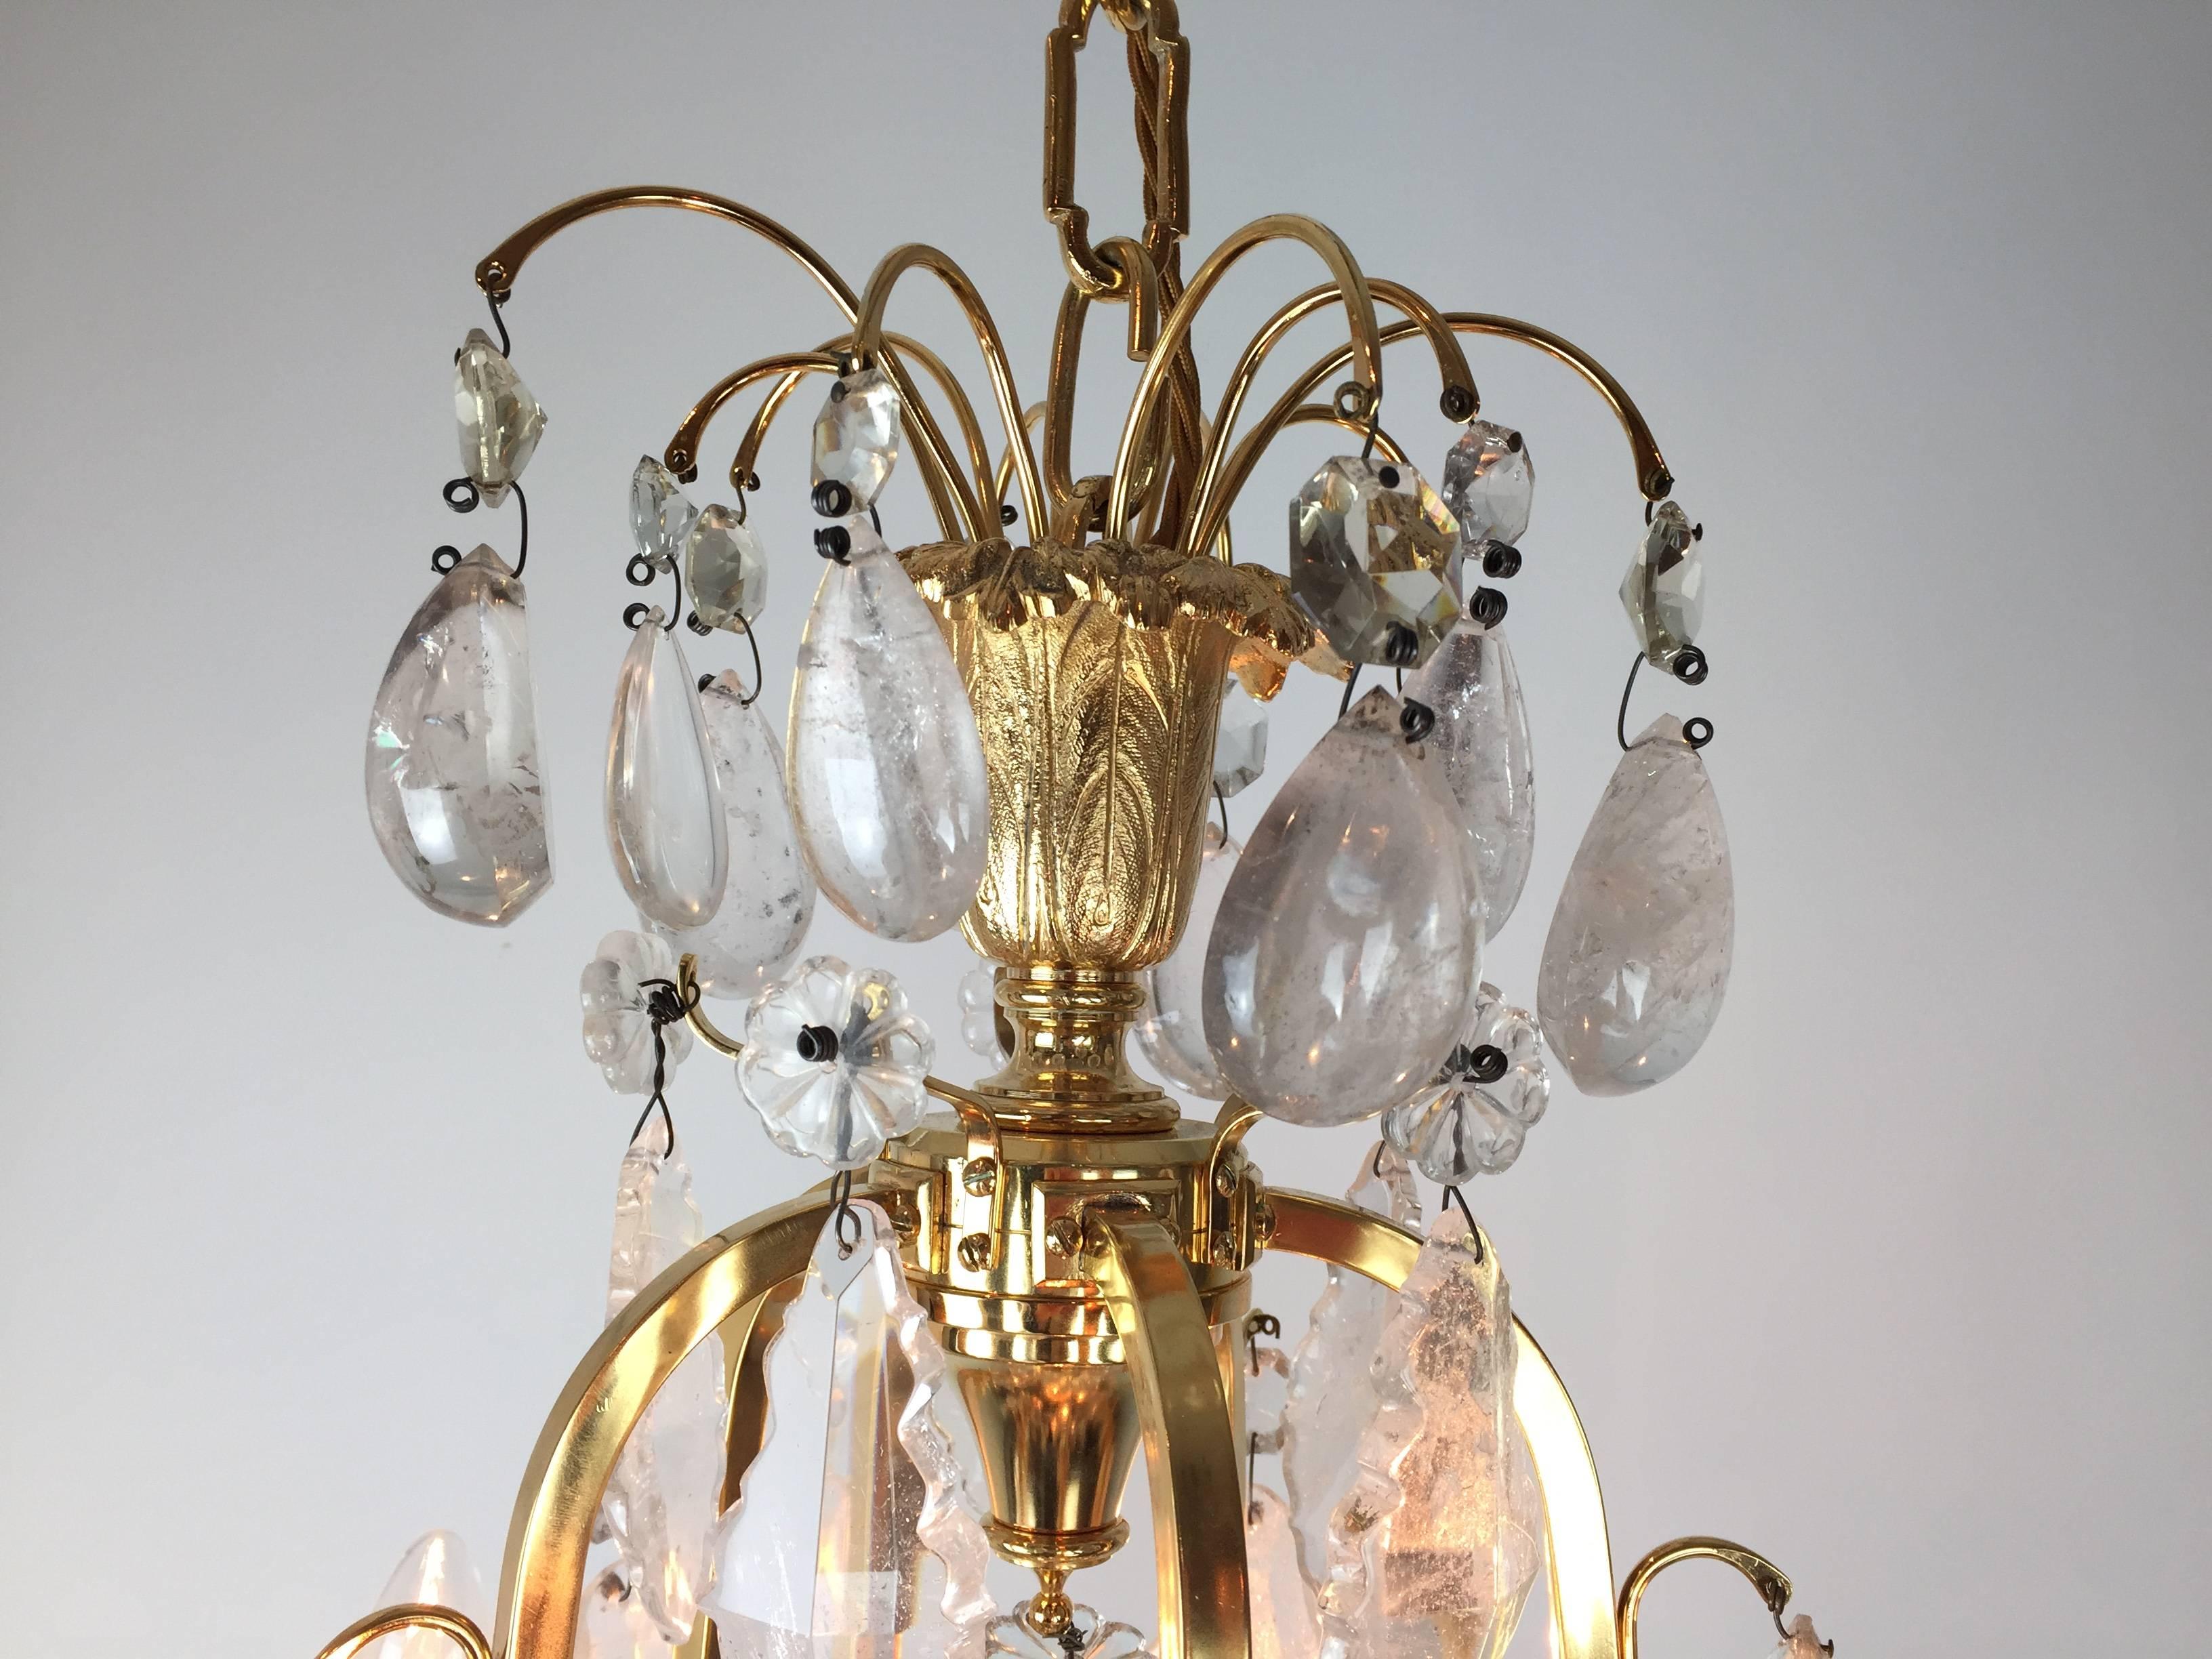 A pair of French 22-carat gold-plated and rock crystal adorned chandeliers with faceted cut crystals. The cast and chiselled drip pans supported on outward swept arms now electrified and internally lit, all of superb quality.